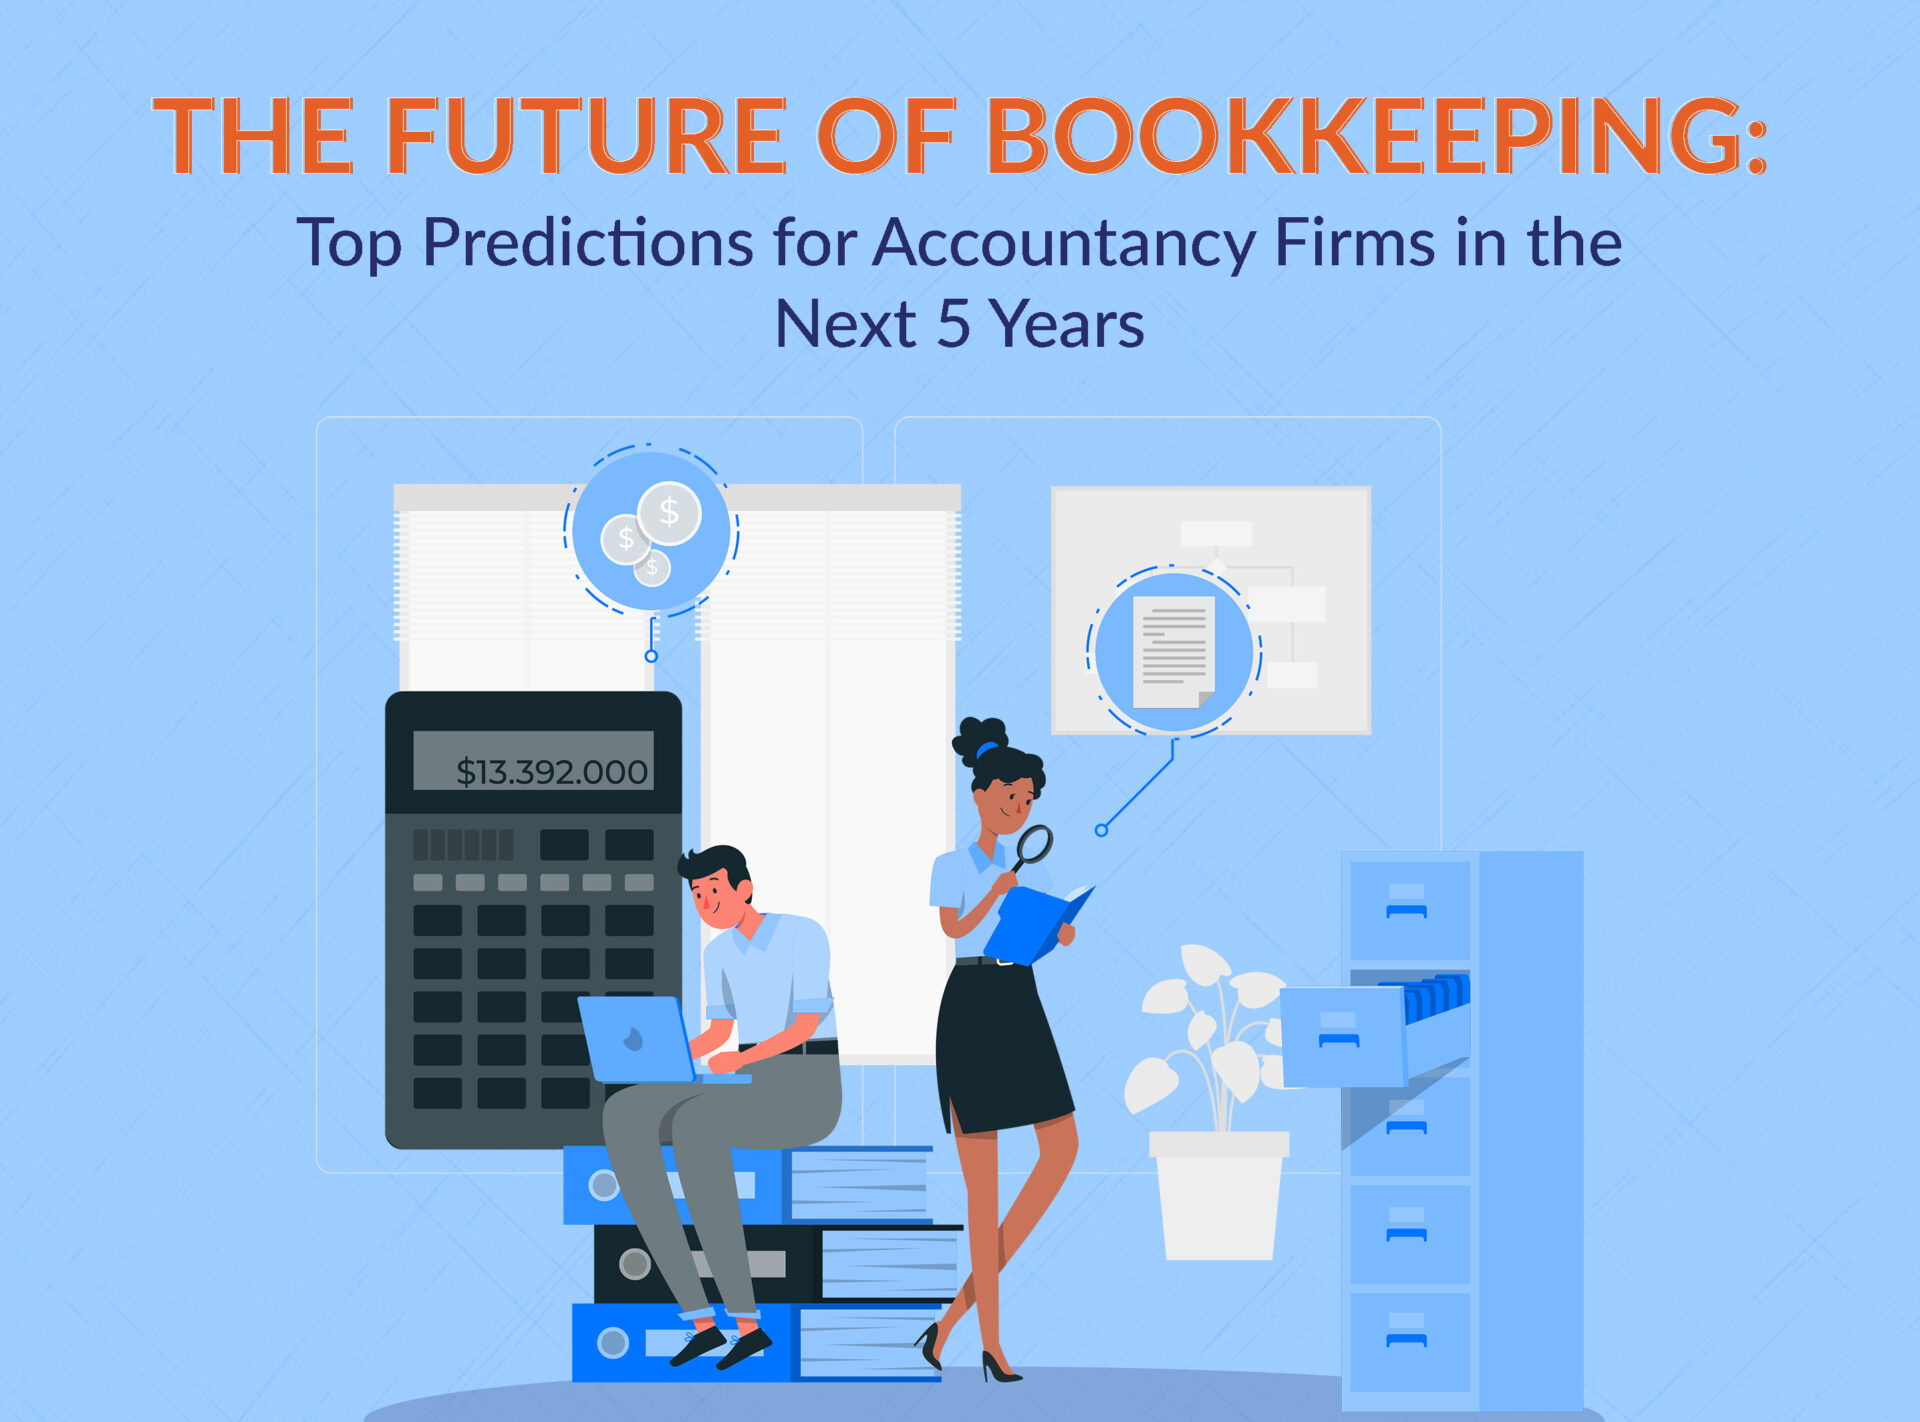 The Future of Bookkeeping: Top Predictions for Accountancy Firms in the Next 5 Years